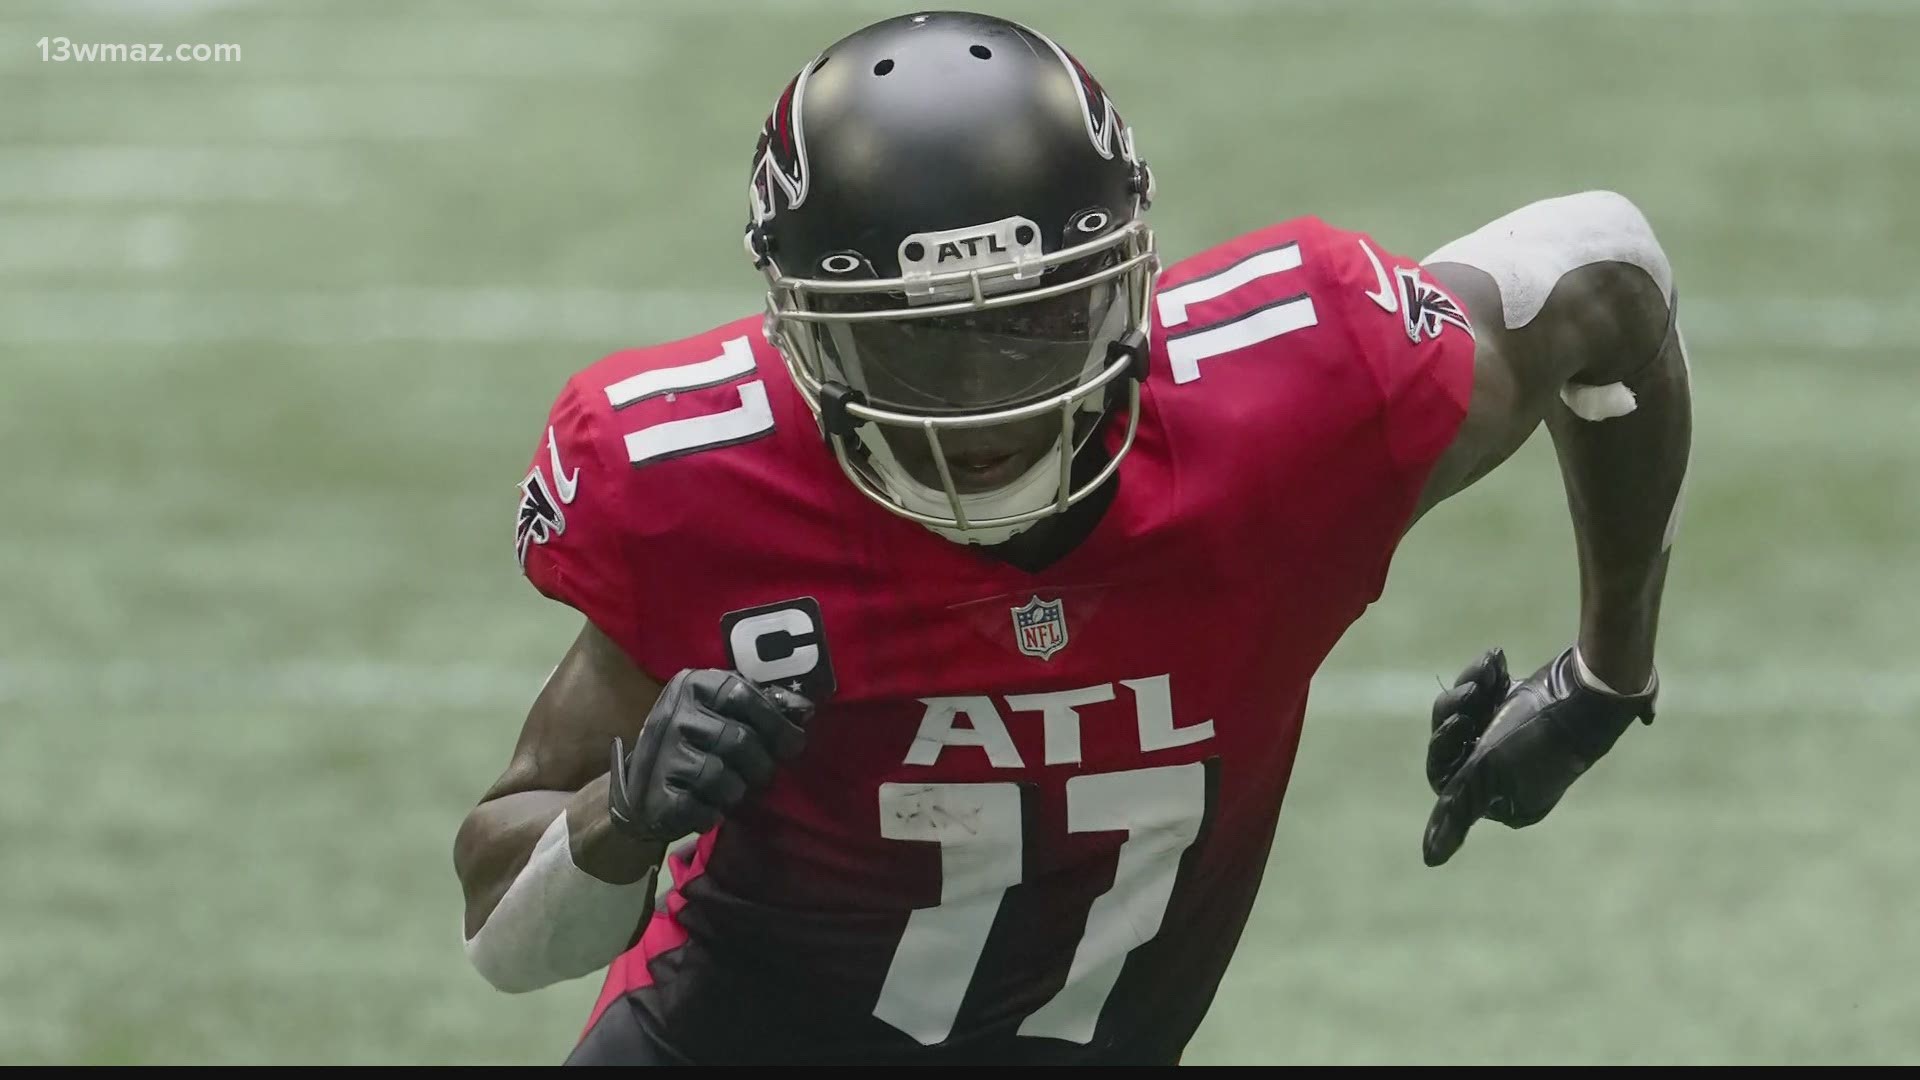 The Atlanta Falcons are without their top receiver and a new era has begun in the ATL, one that won't include Julio Jones.